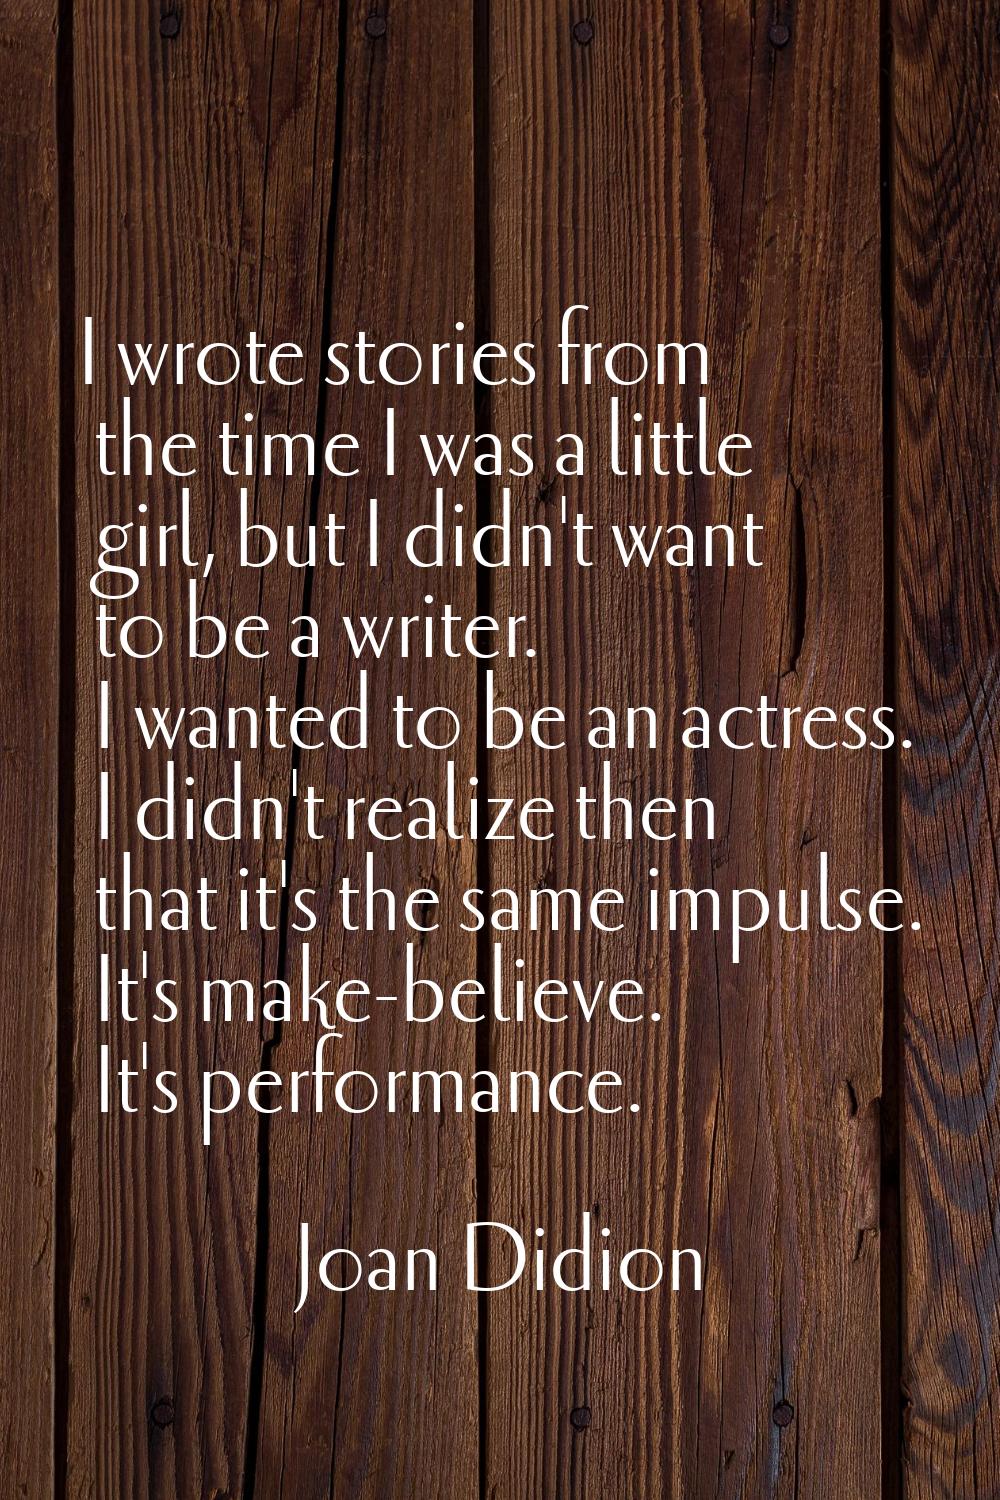 I wrote stories from the time I was a little girl, but I didn't want to be a writer. I wanted to be